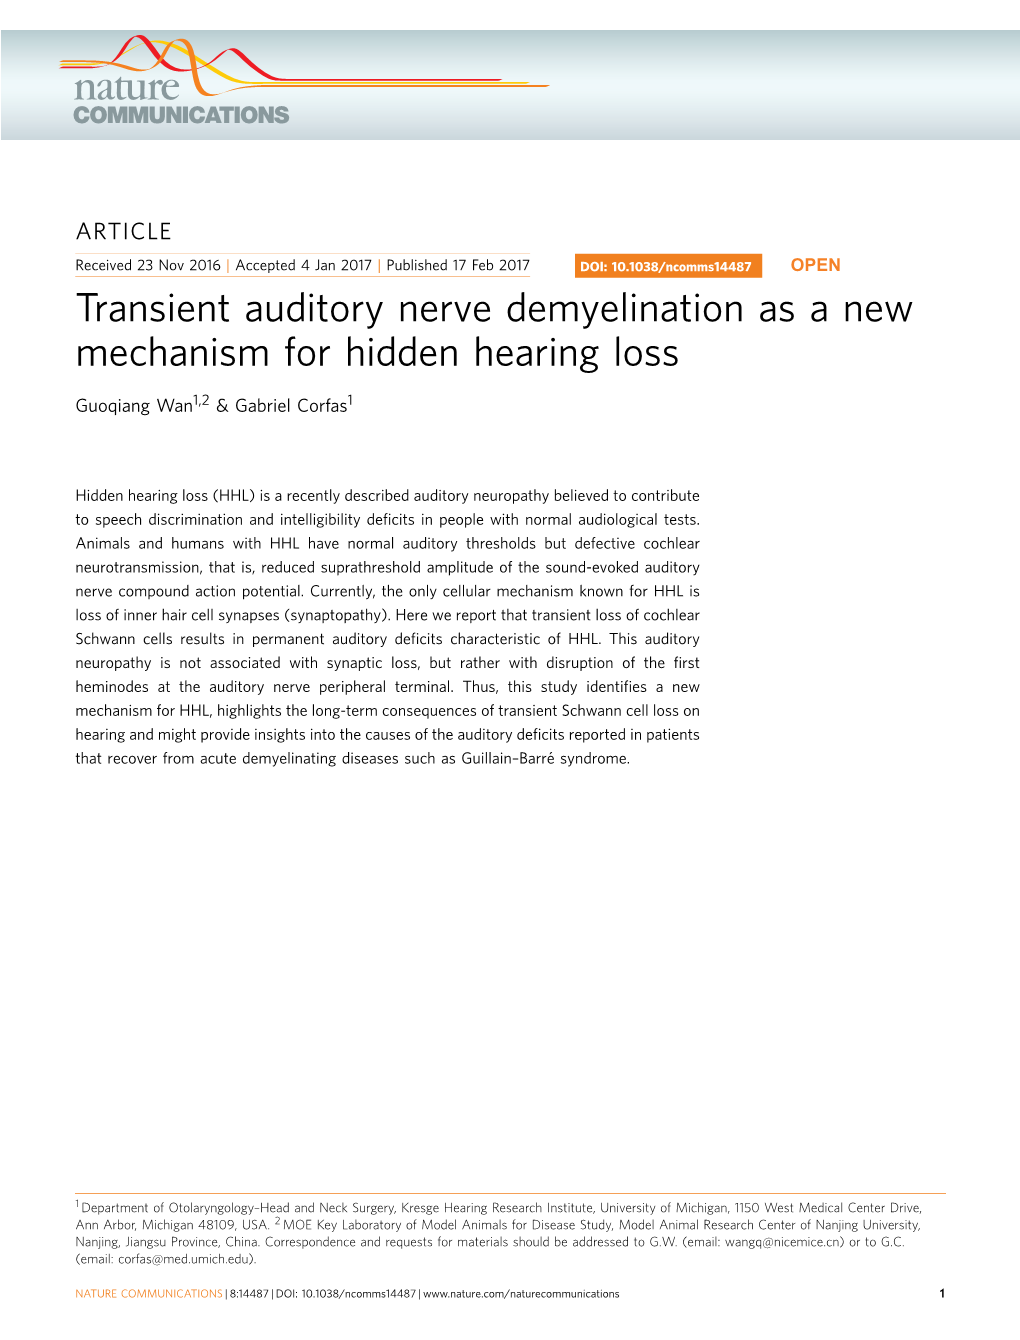 Transient Auditory Nerve Demyelination As a New Mechanism for Hidden Hearing Loss